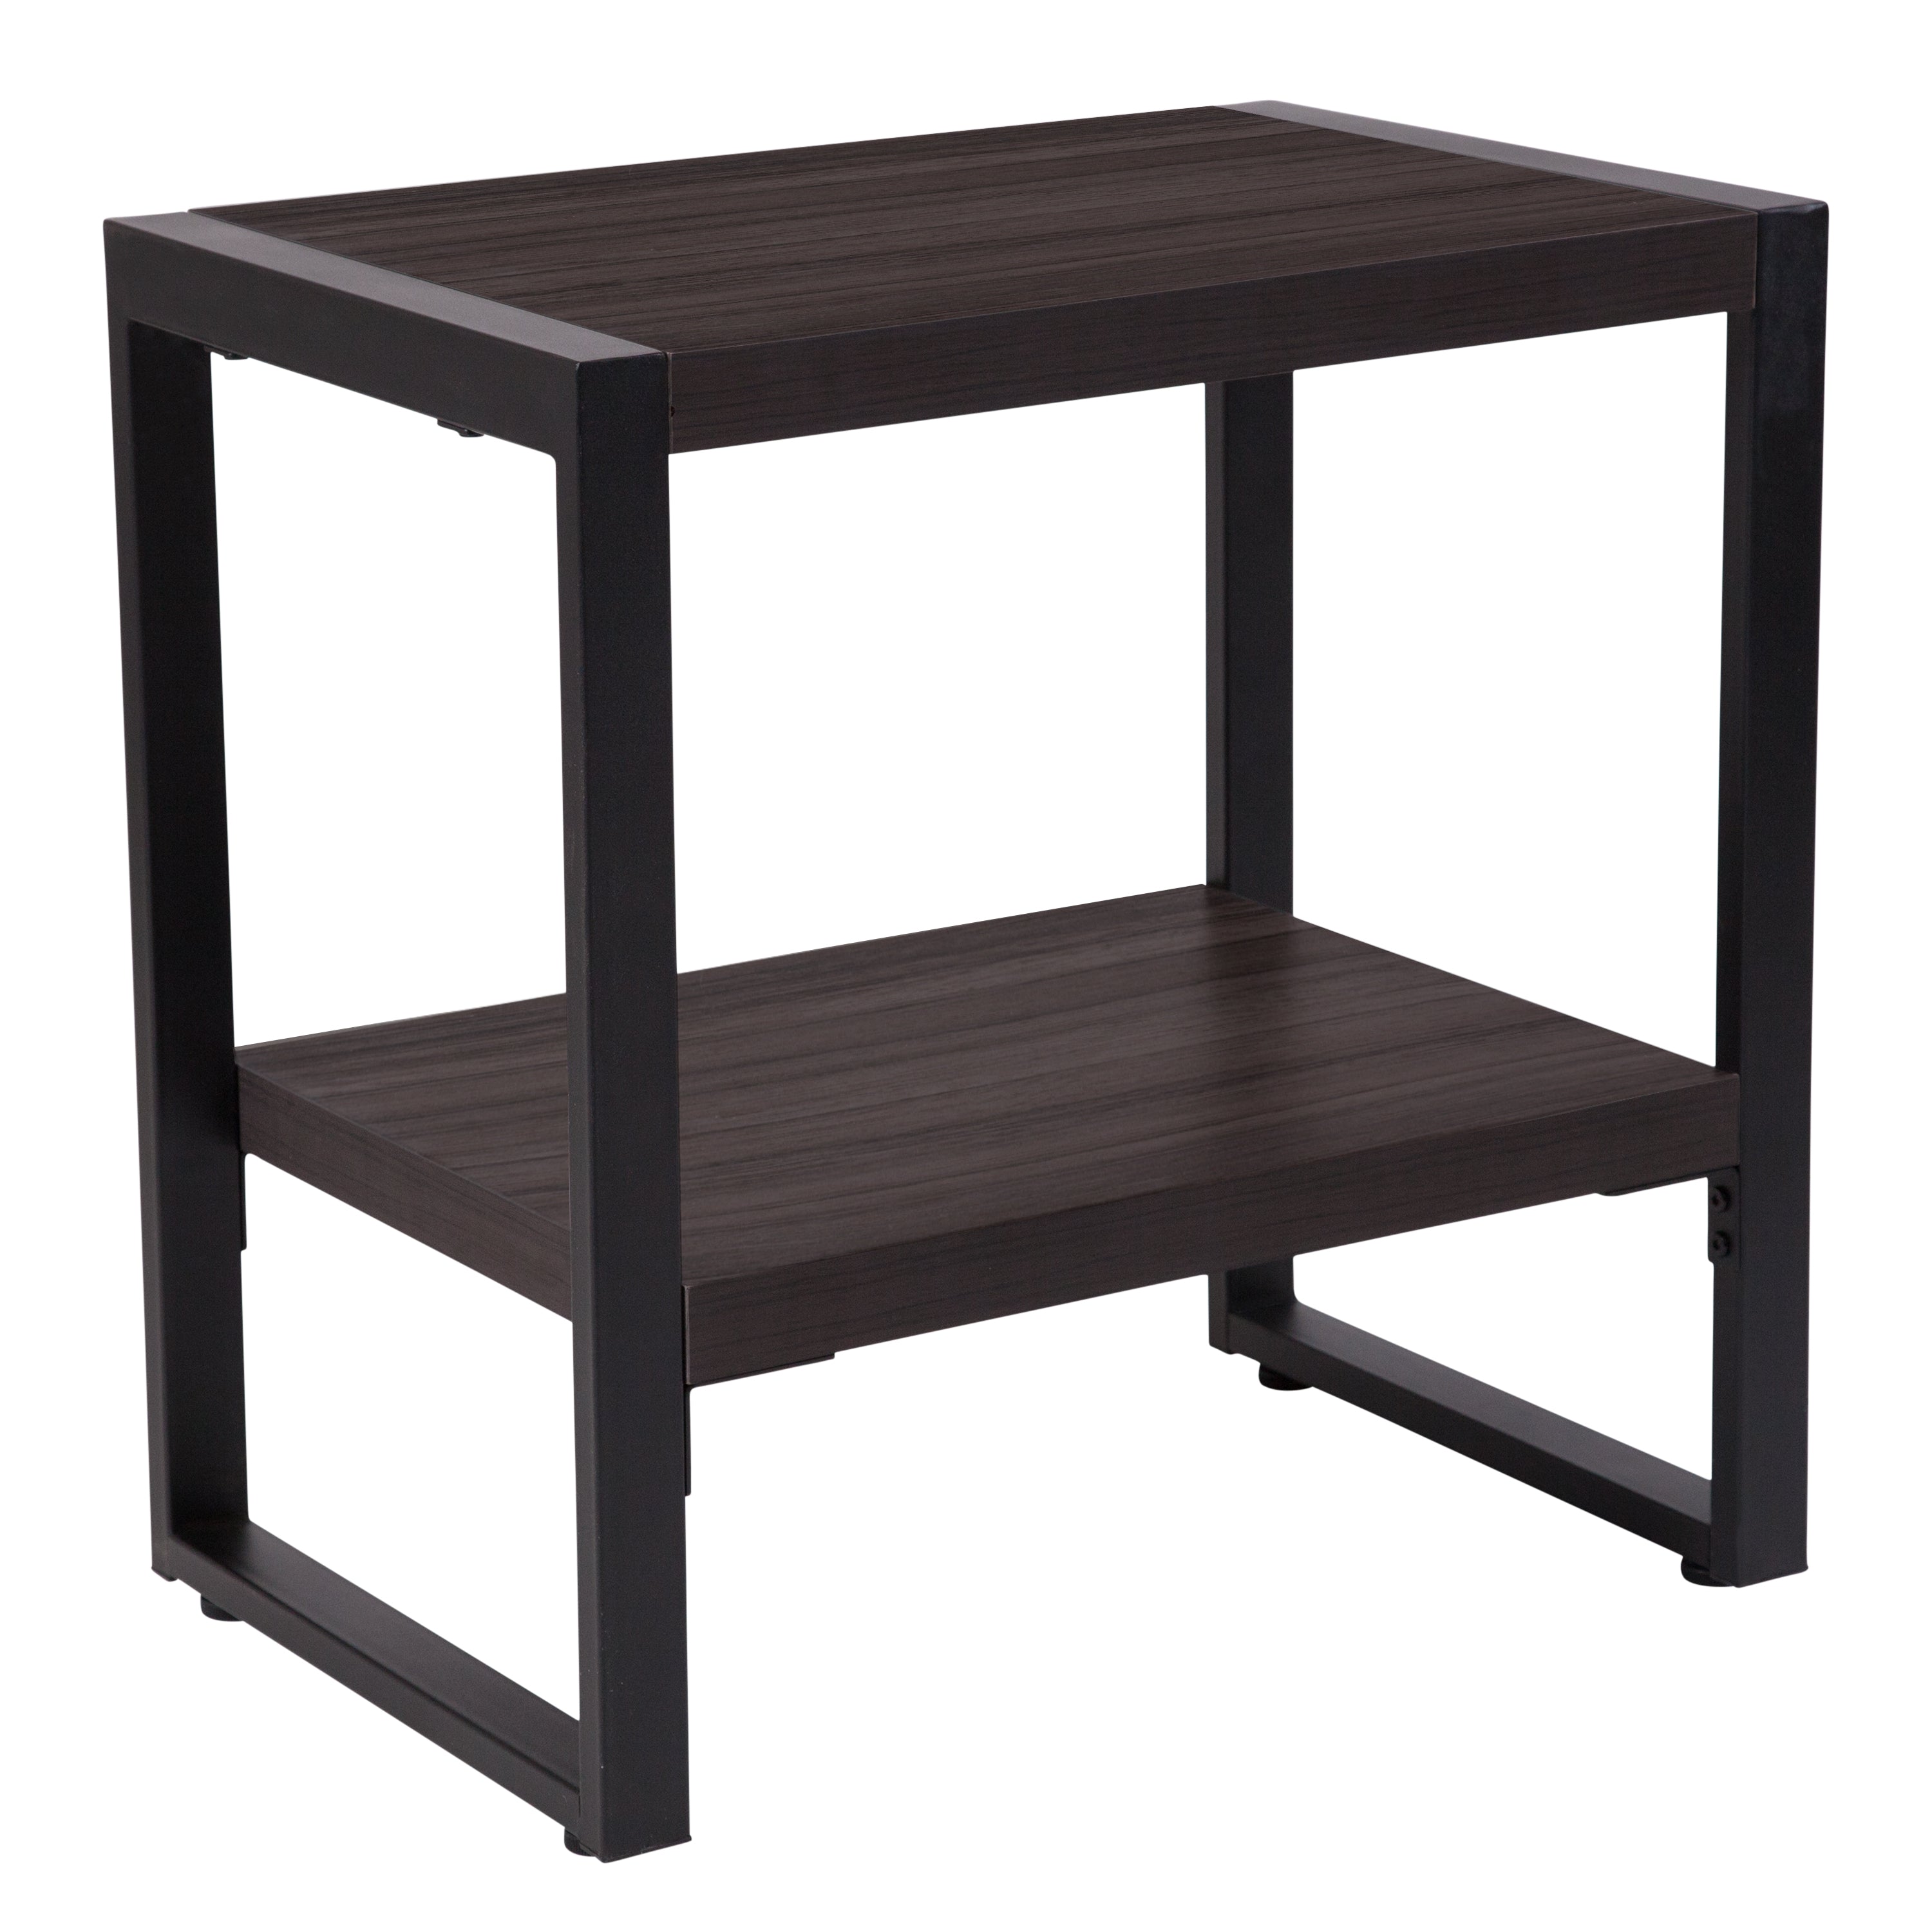 Thompson Collection Wood Grain Finish End Table with Metal Frame-End Table-Flash Furniture-Wall2Wall Furnishings